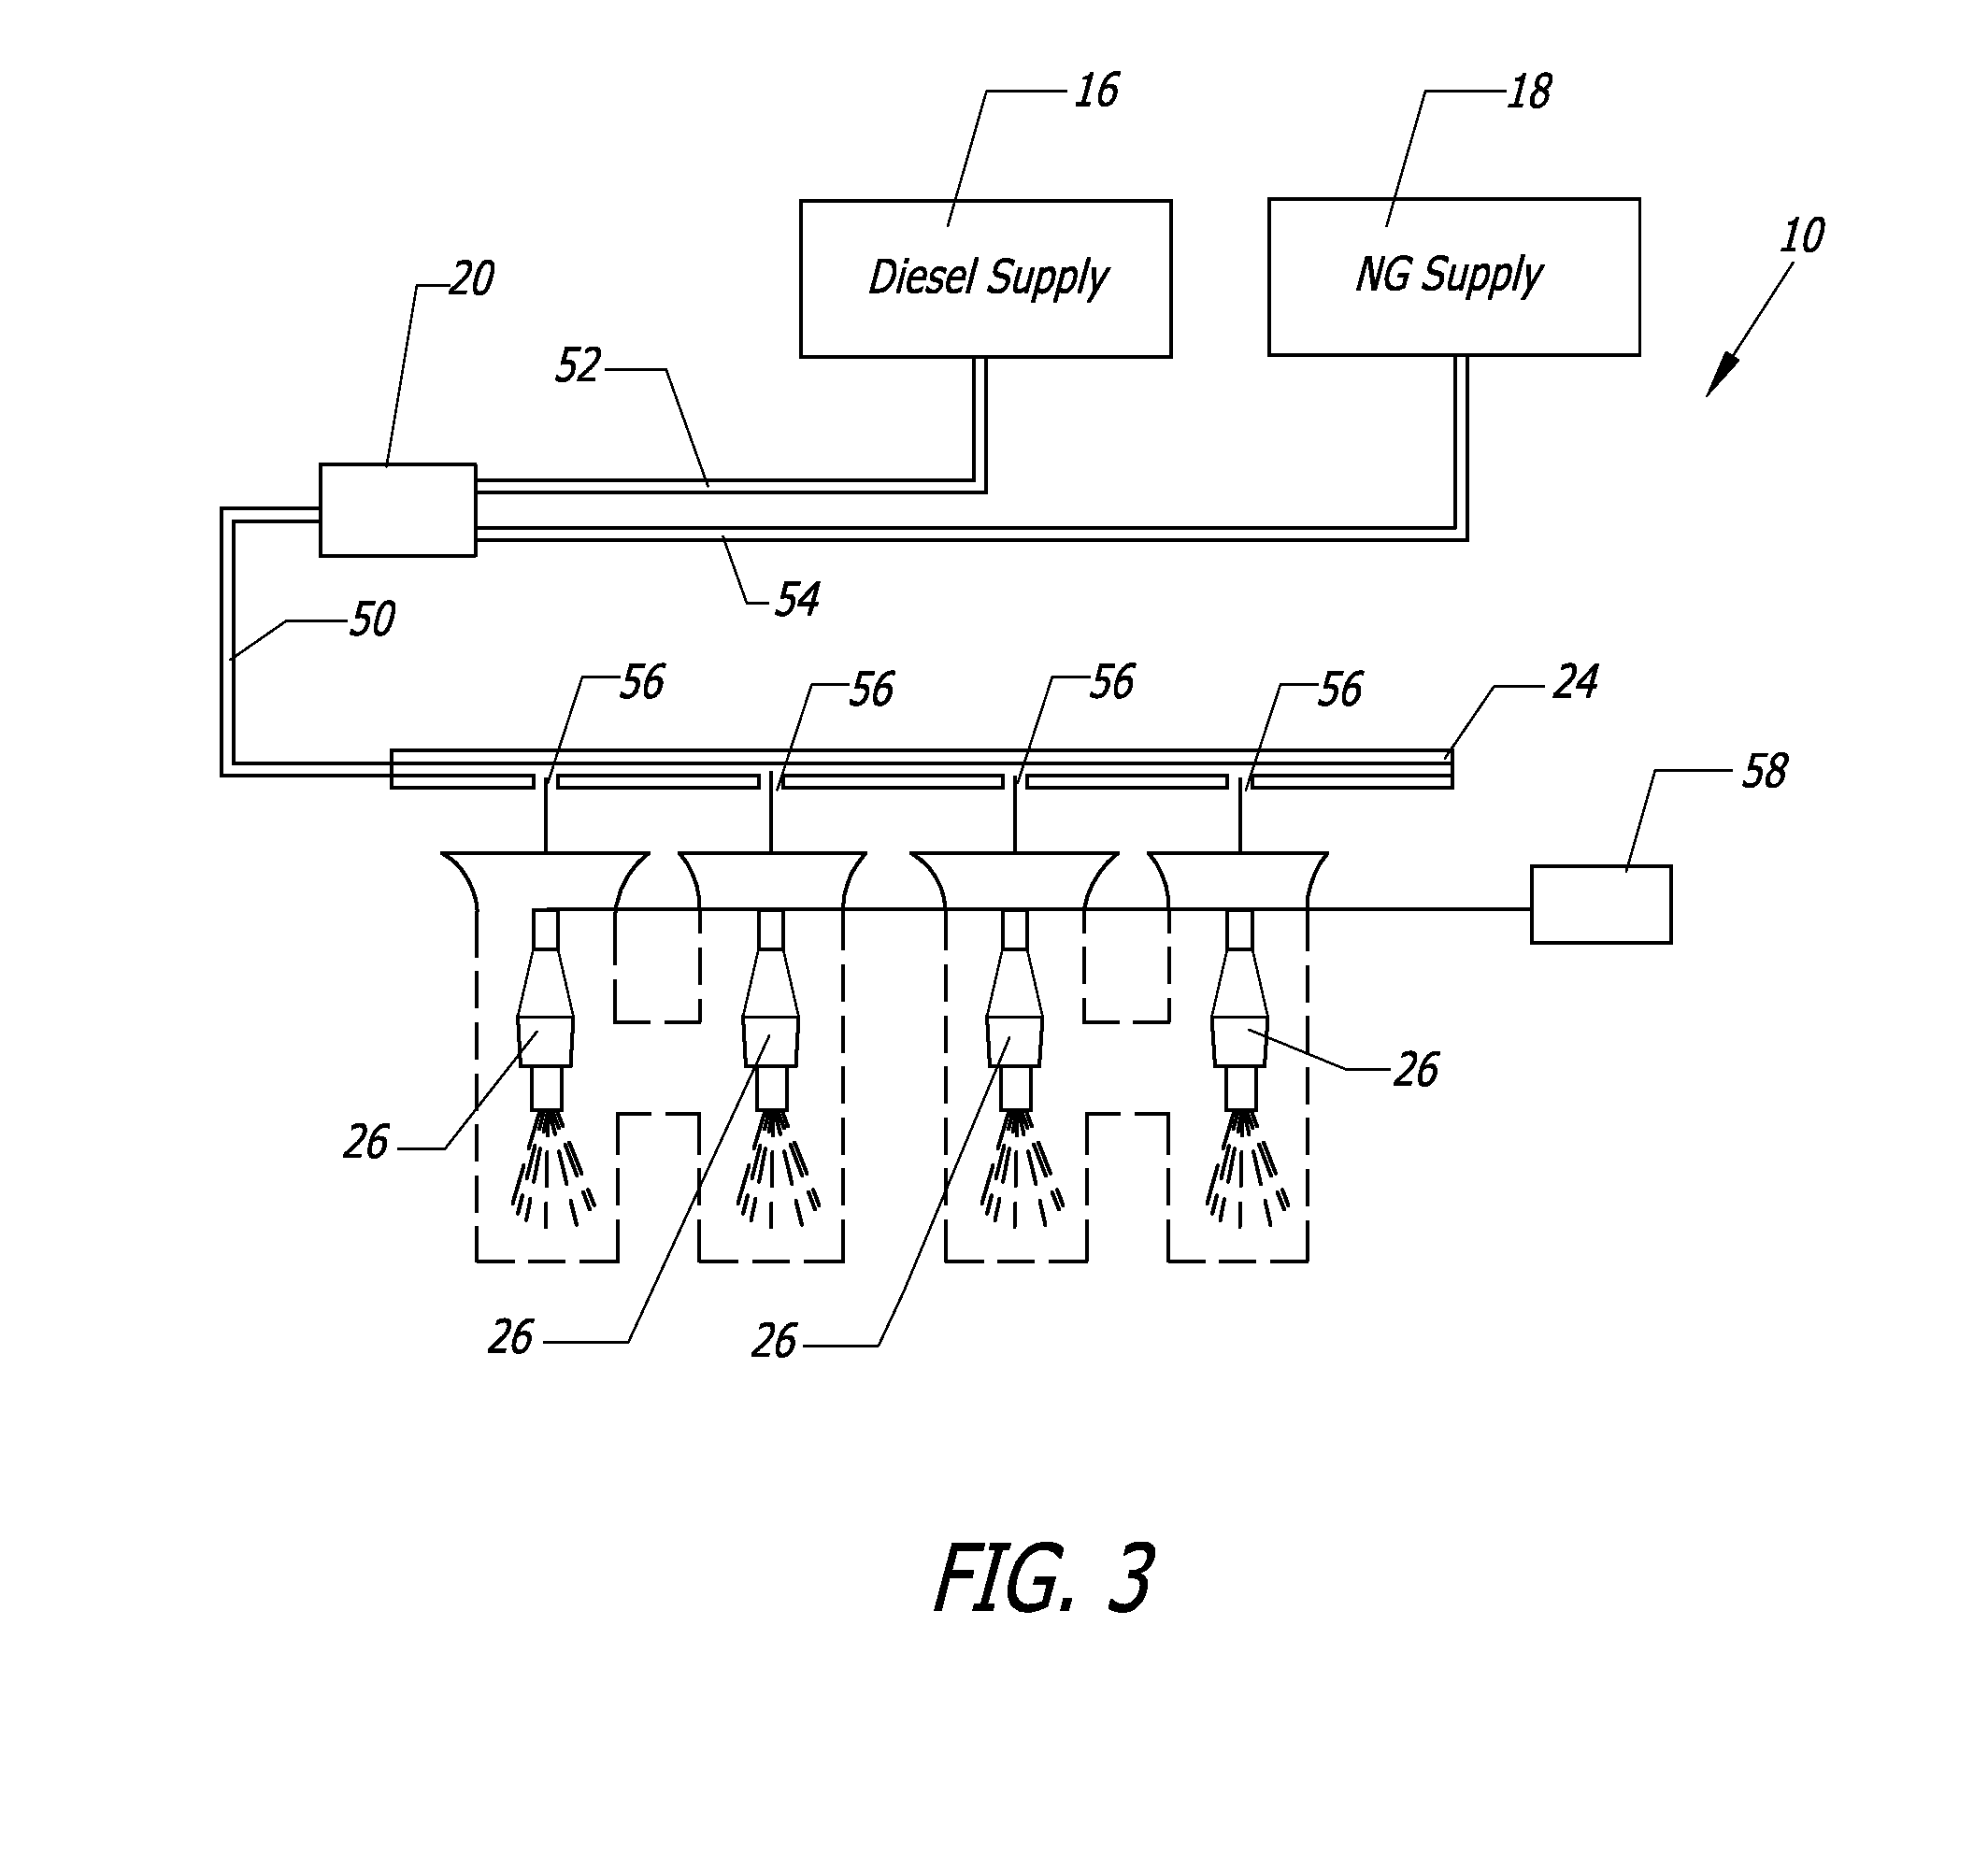 Multi-fuel system for internal combustion engines